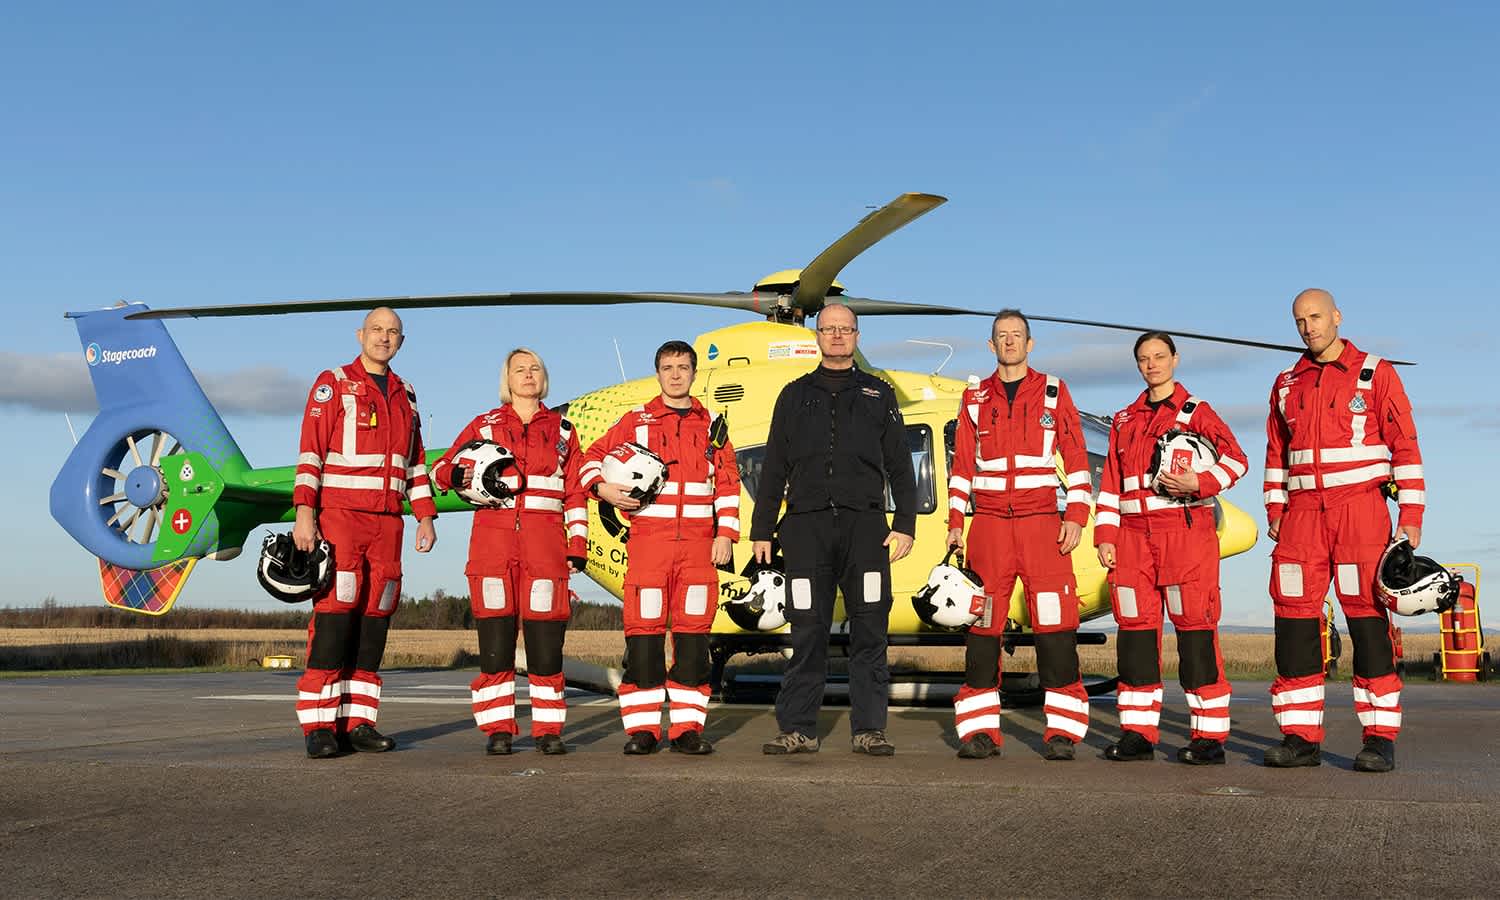 By responding to trauma and medical emergencies, Scotland's Charity Air Ambulance is there for everyone in Scotland when they need them.